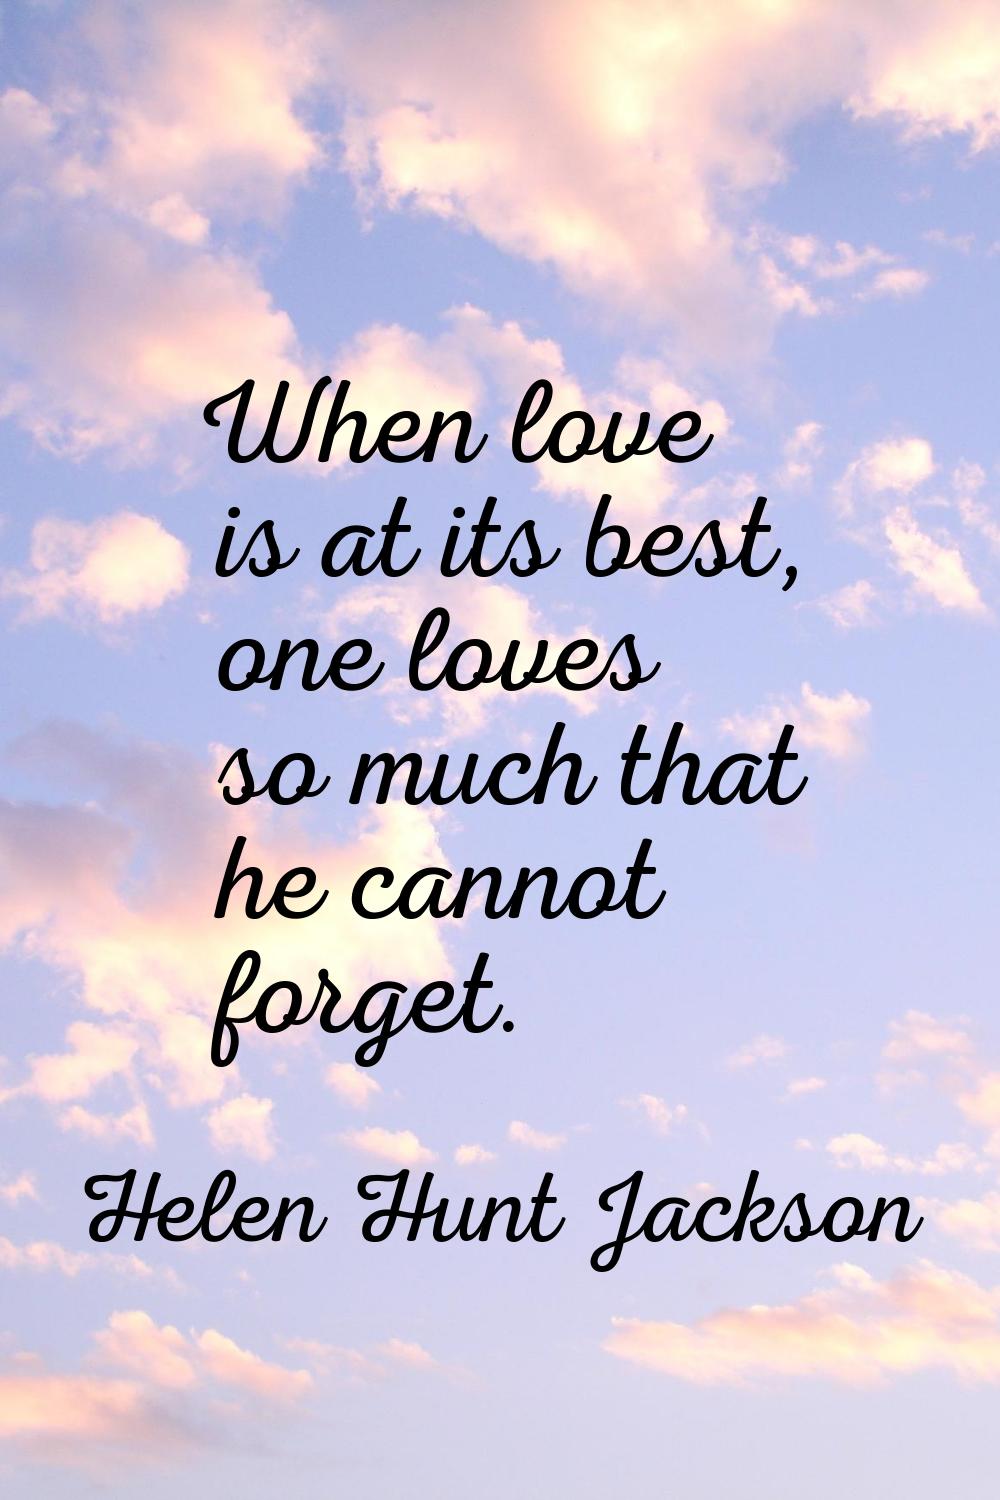 When love is at its best, one loves so much that he cannot forget.